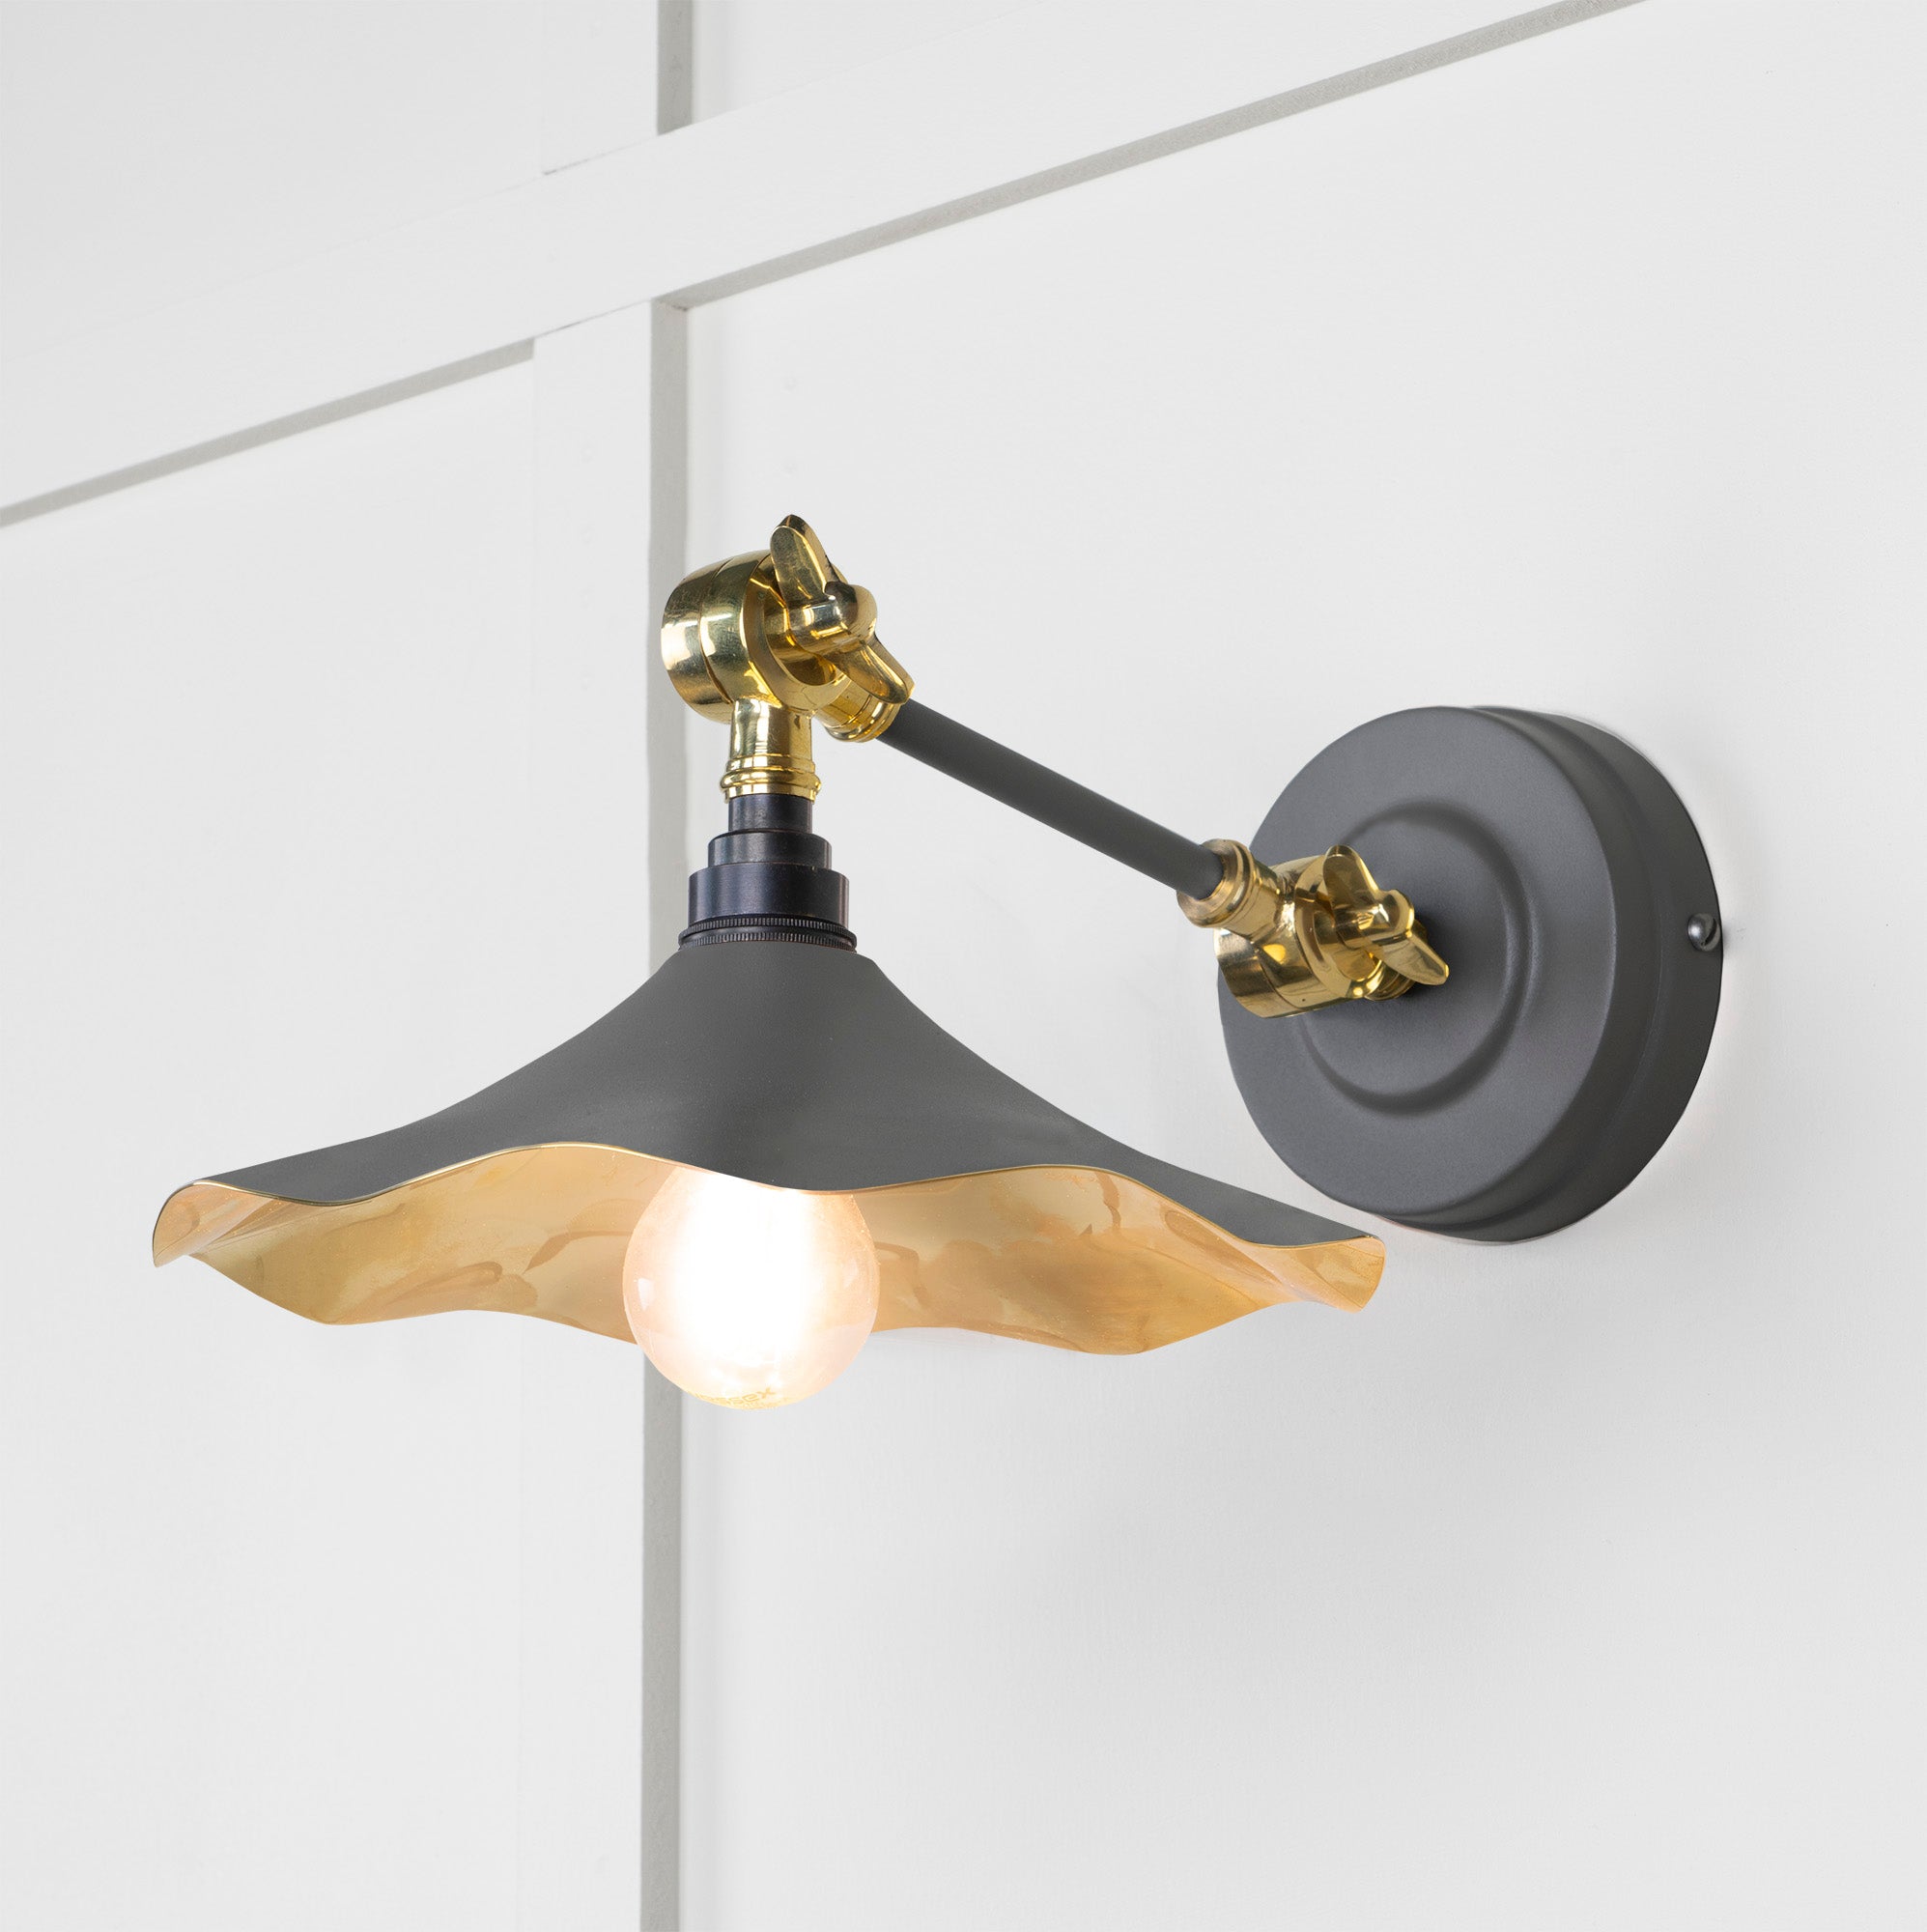 Image of Flora Wall Light in Bluff with Polished Brass Finish